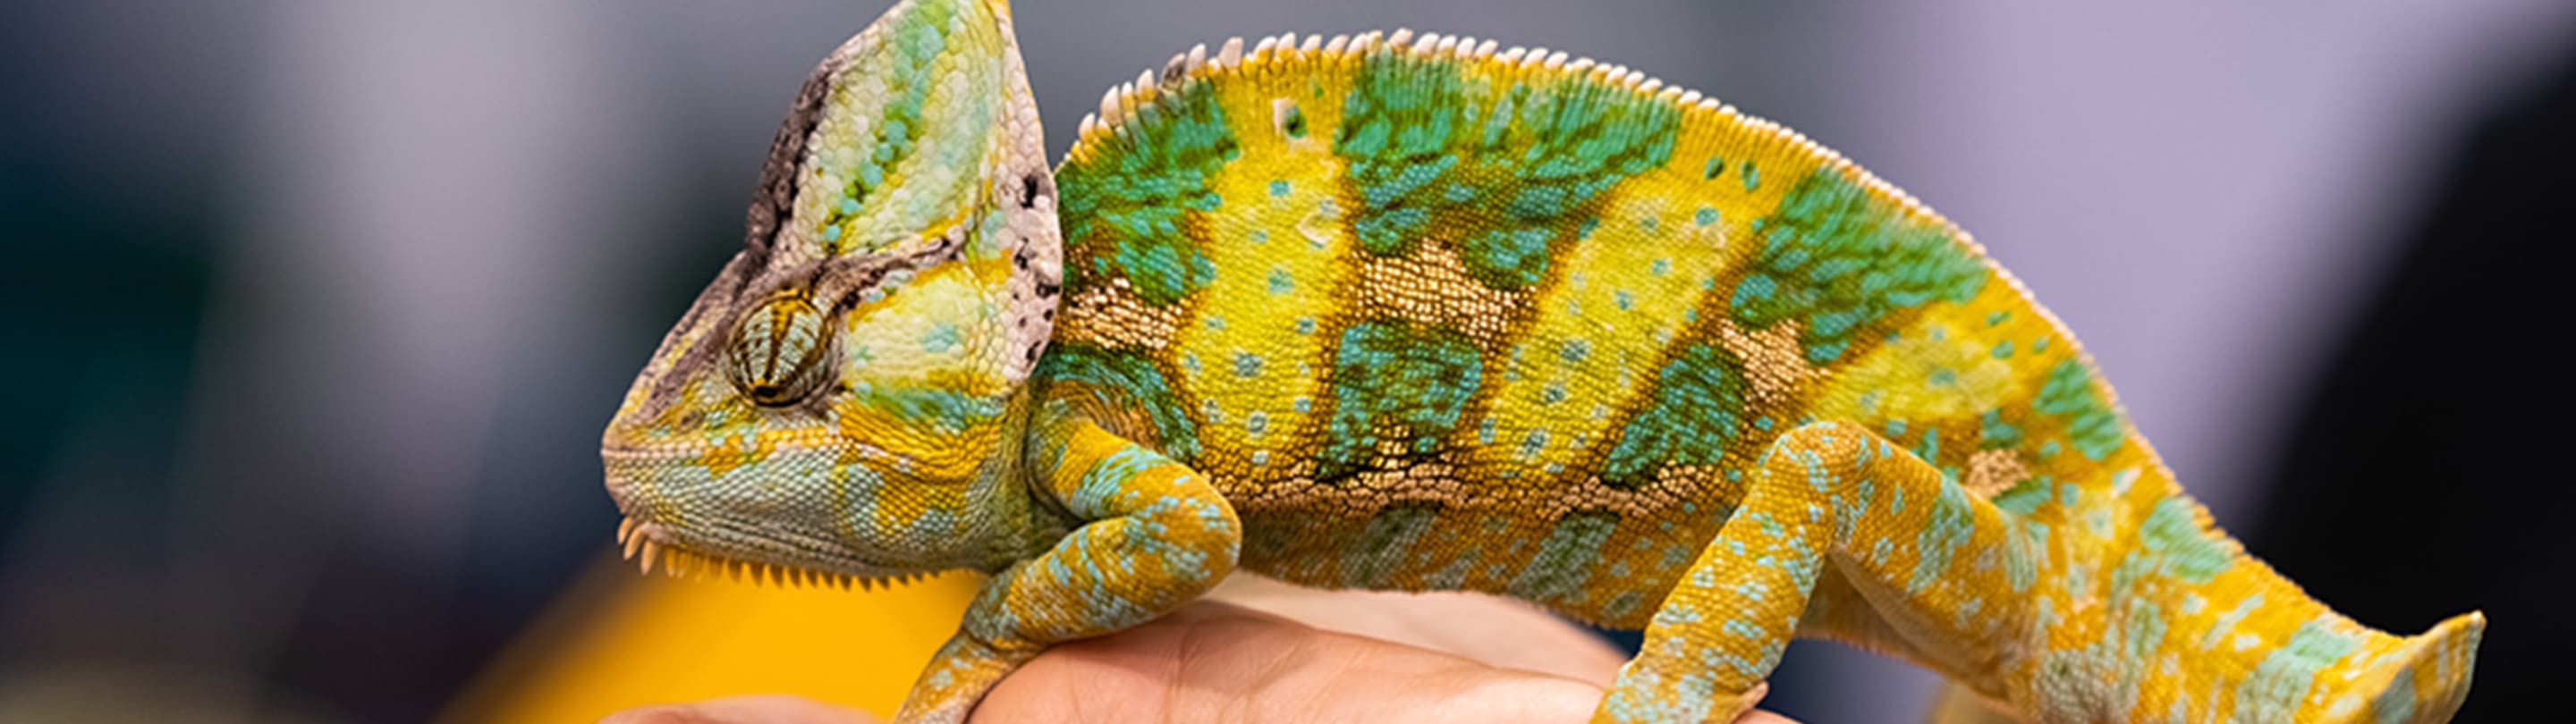 How Can You Tell if a Chameleon is Sick?